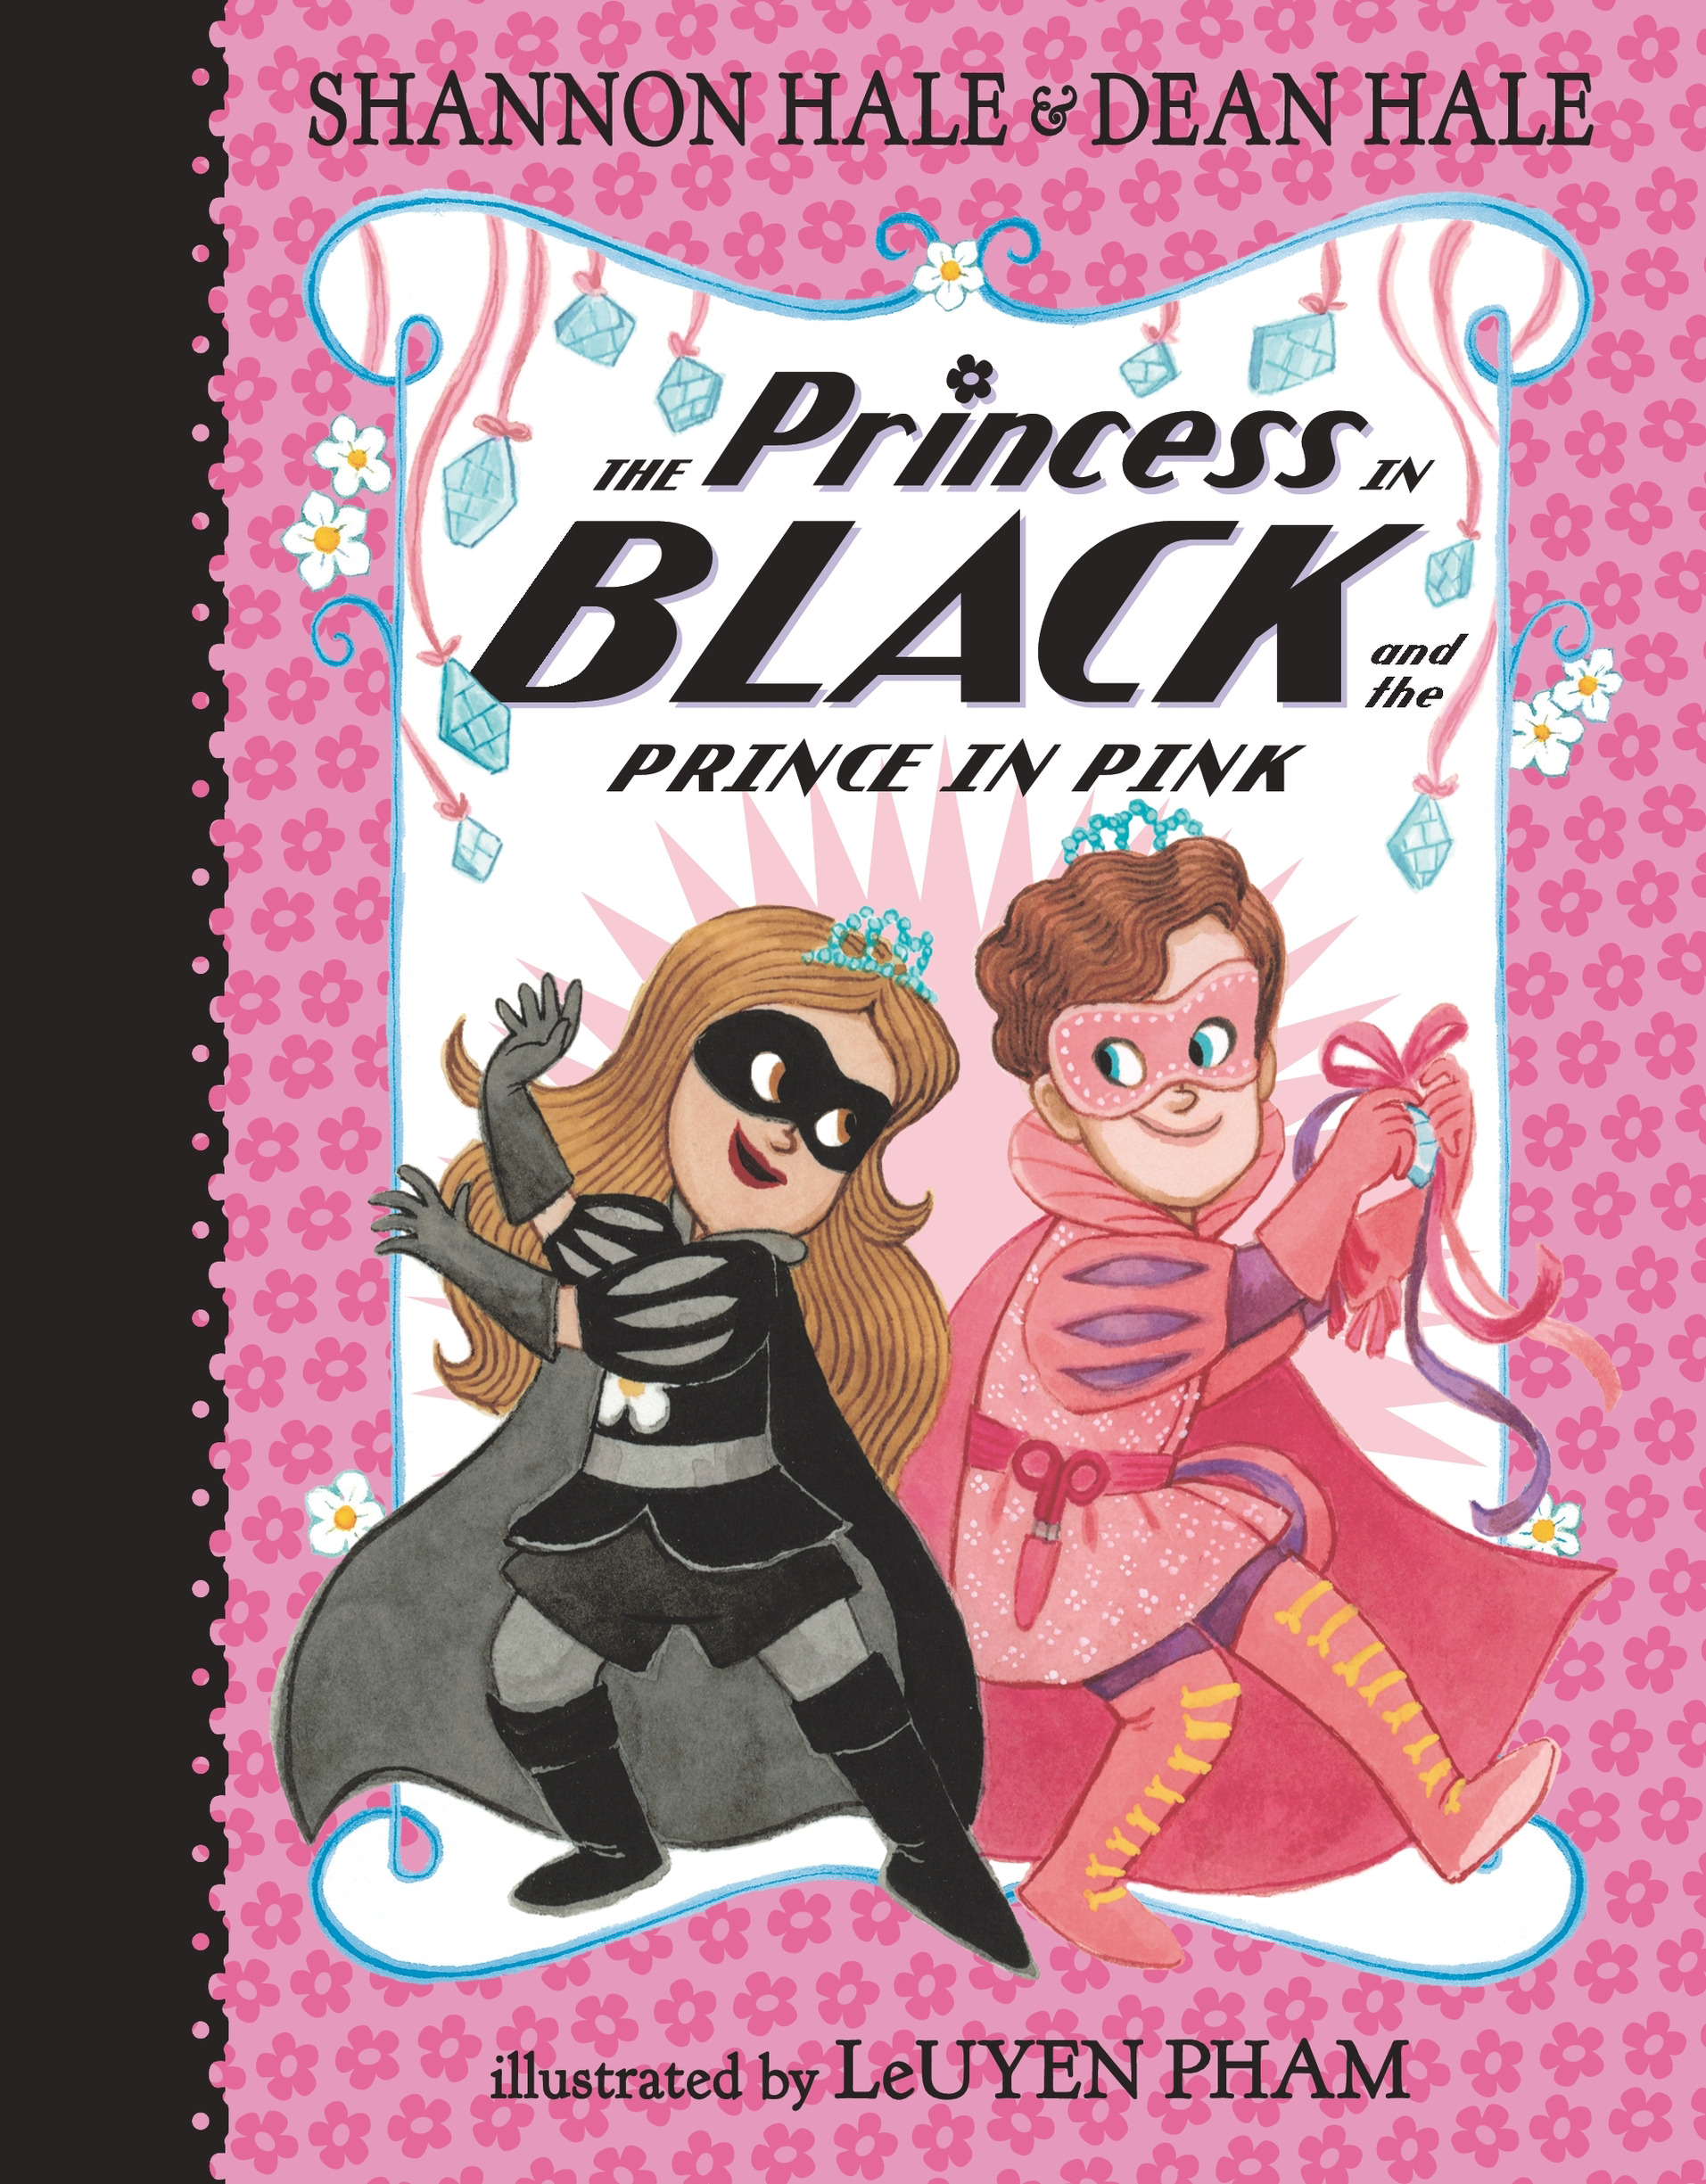 Princess in Black Vol. 10 - The Princess in Black and the Prince in Pink | Hale, Shannon